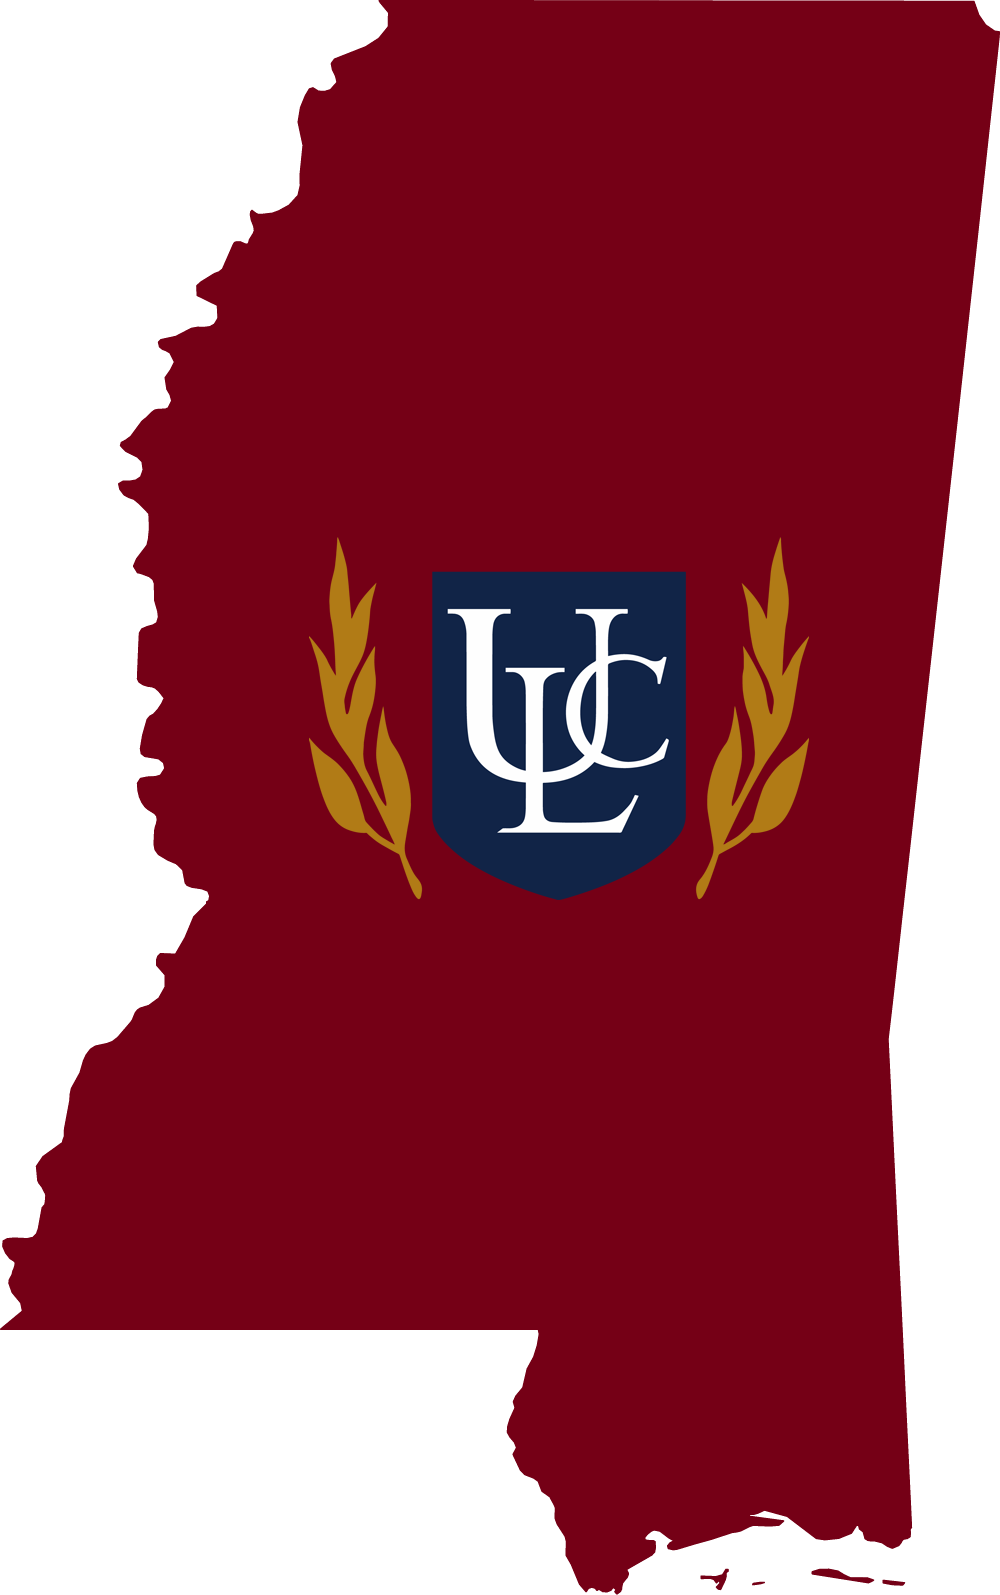 An outline of Mississippi with the ULC logo